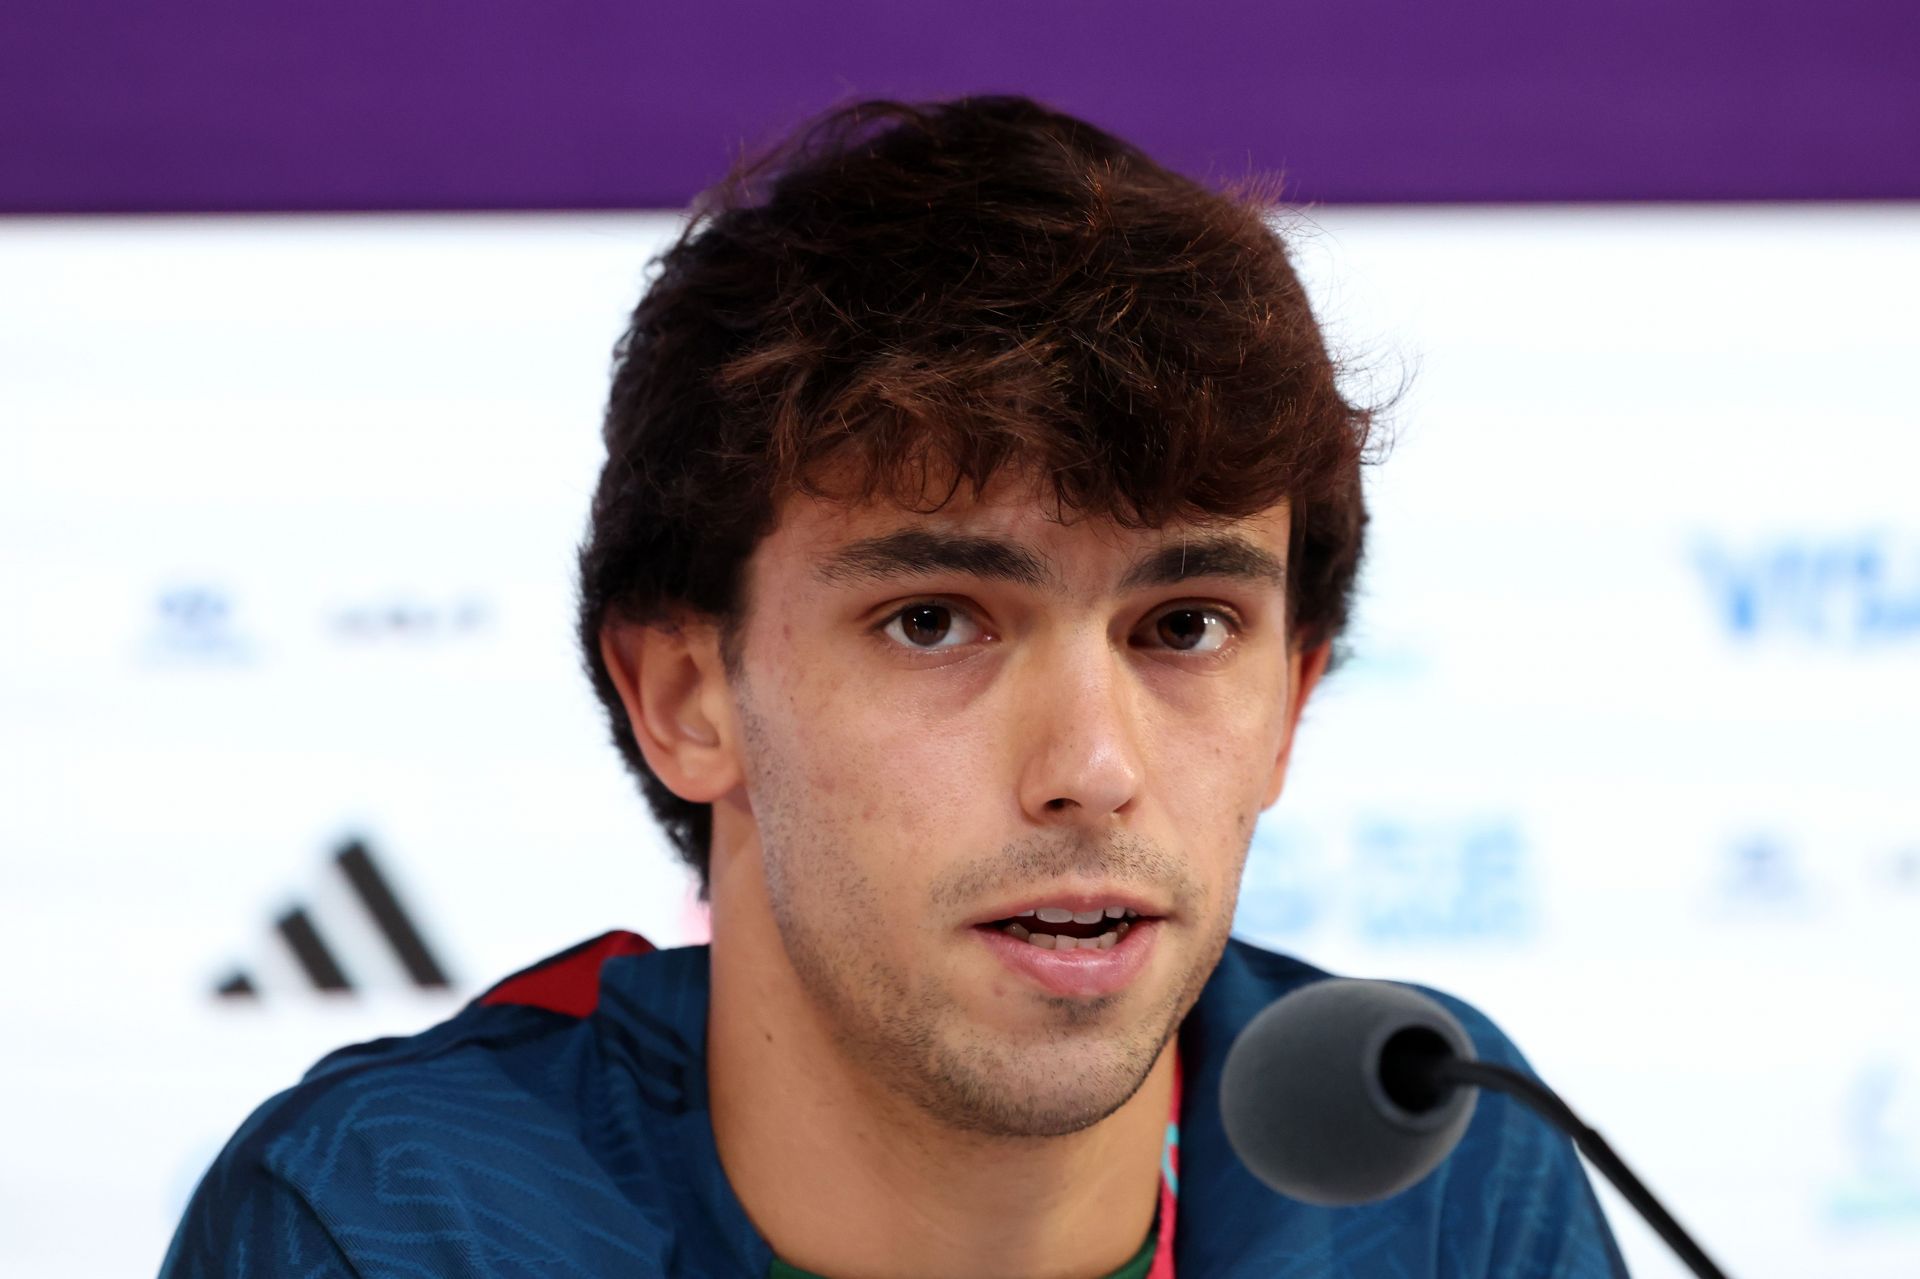 Joao Felix during a press conference for the Portugal national team